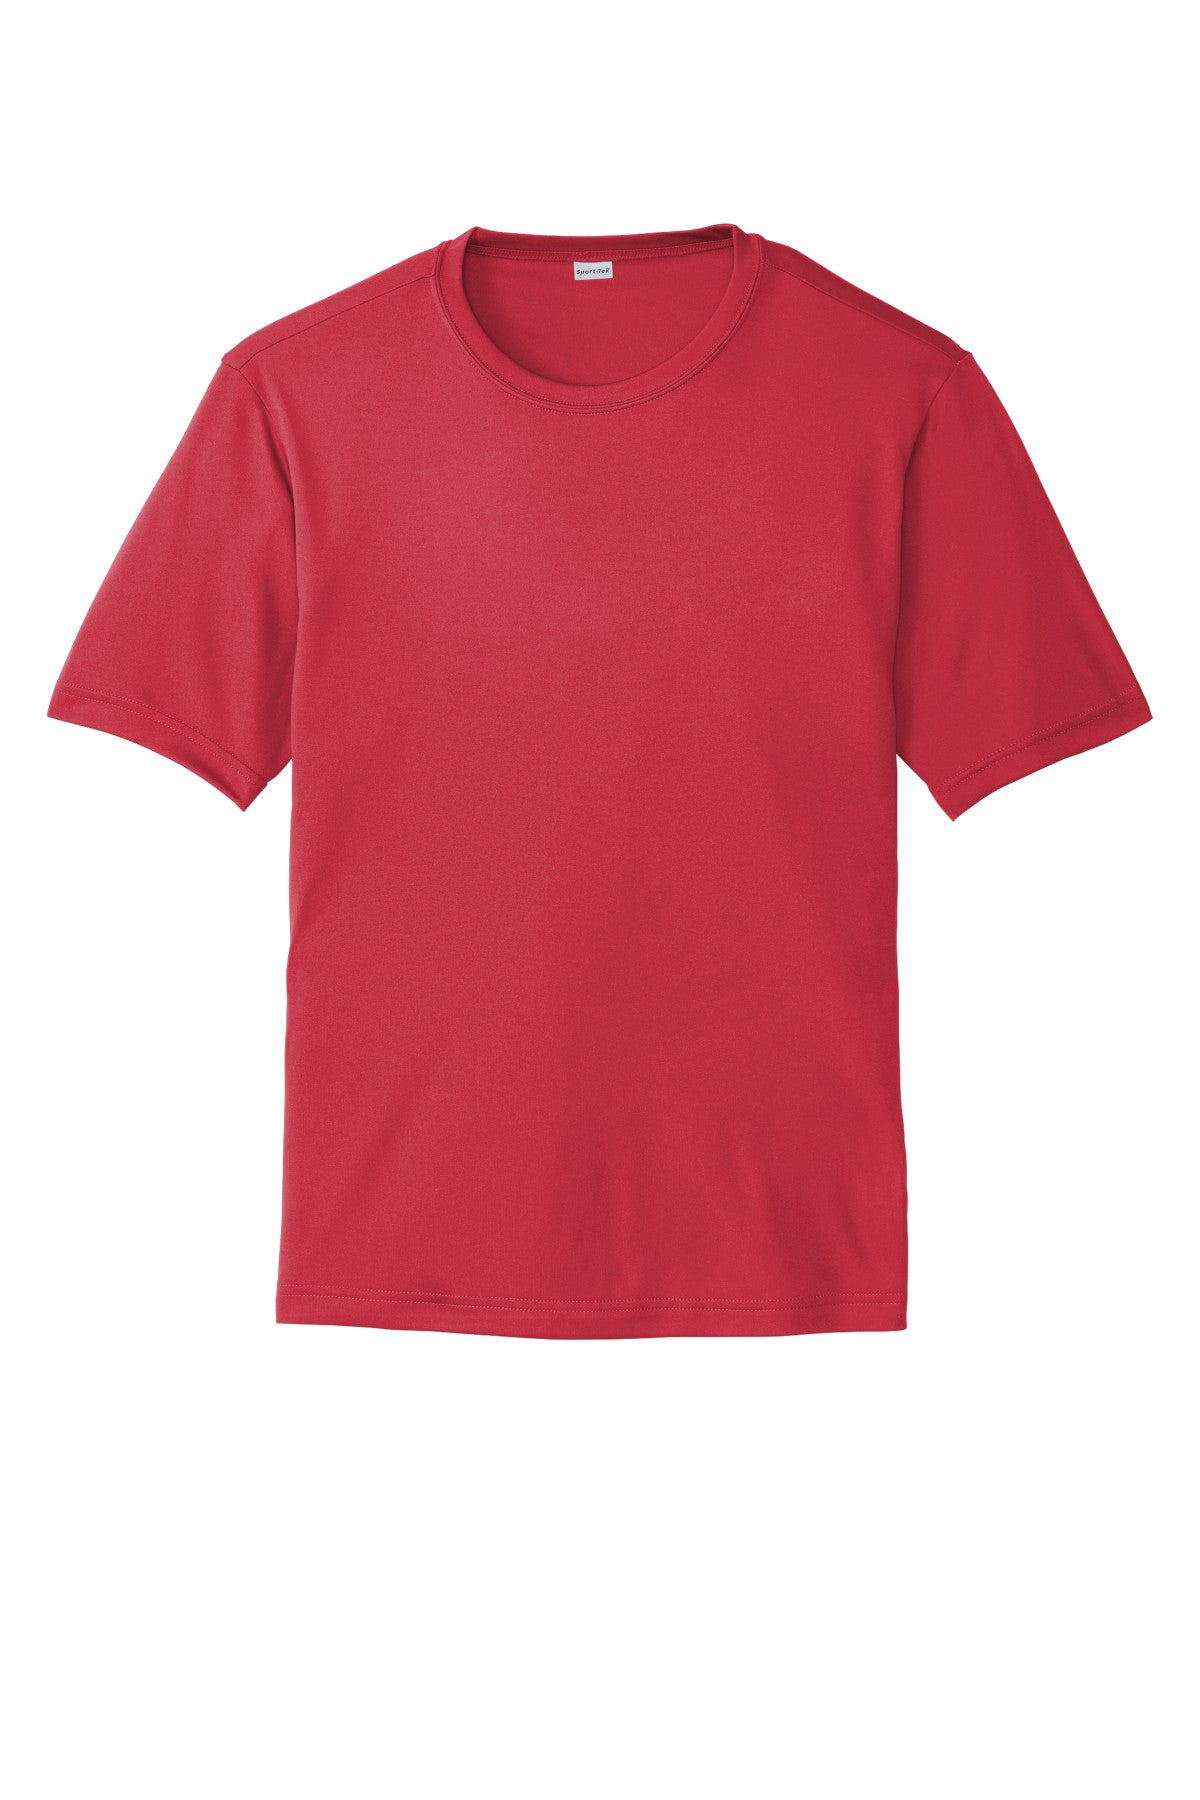 Sport-Tek St350 Polyester Adult T-Shirt Ad Small / True Red